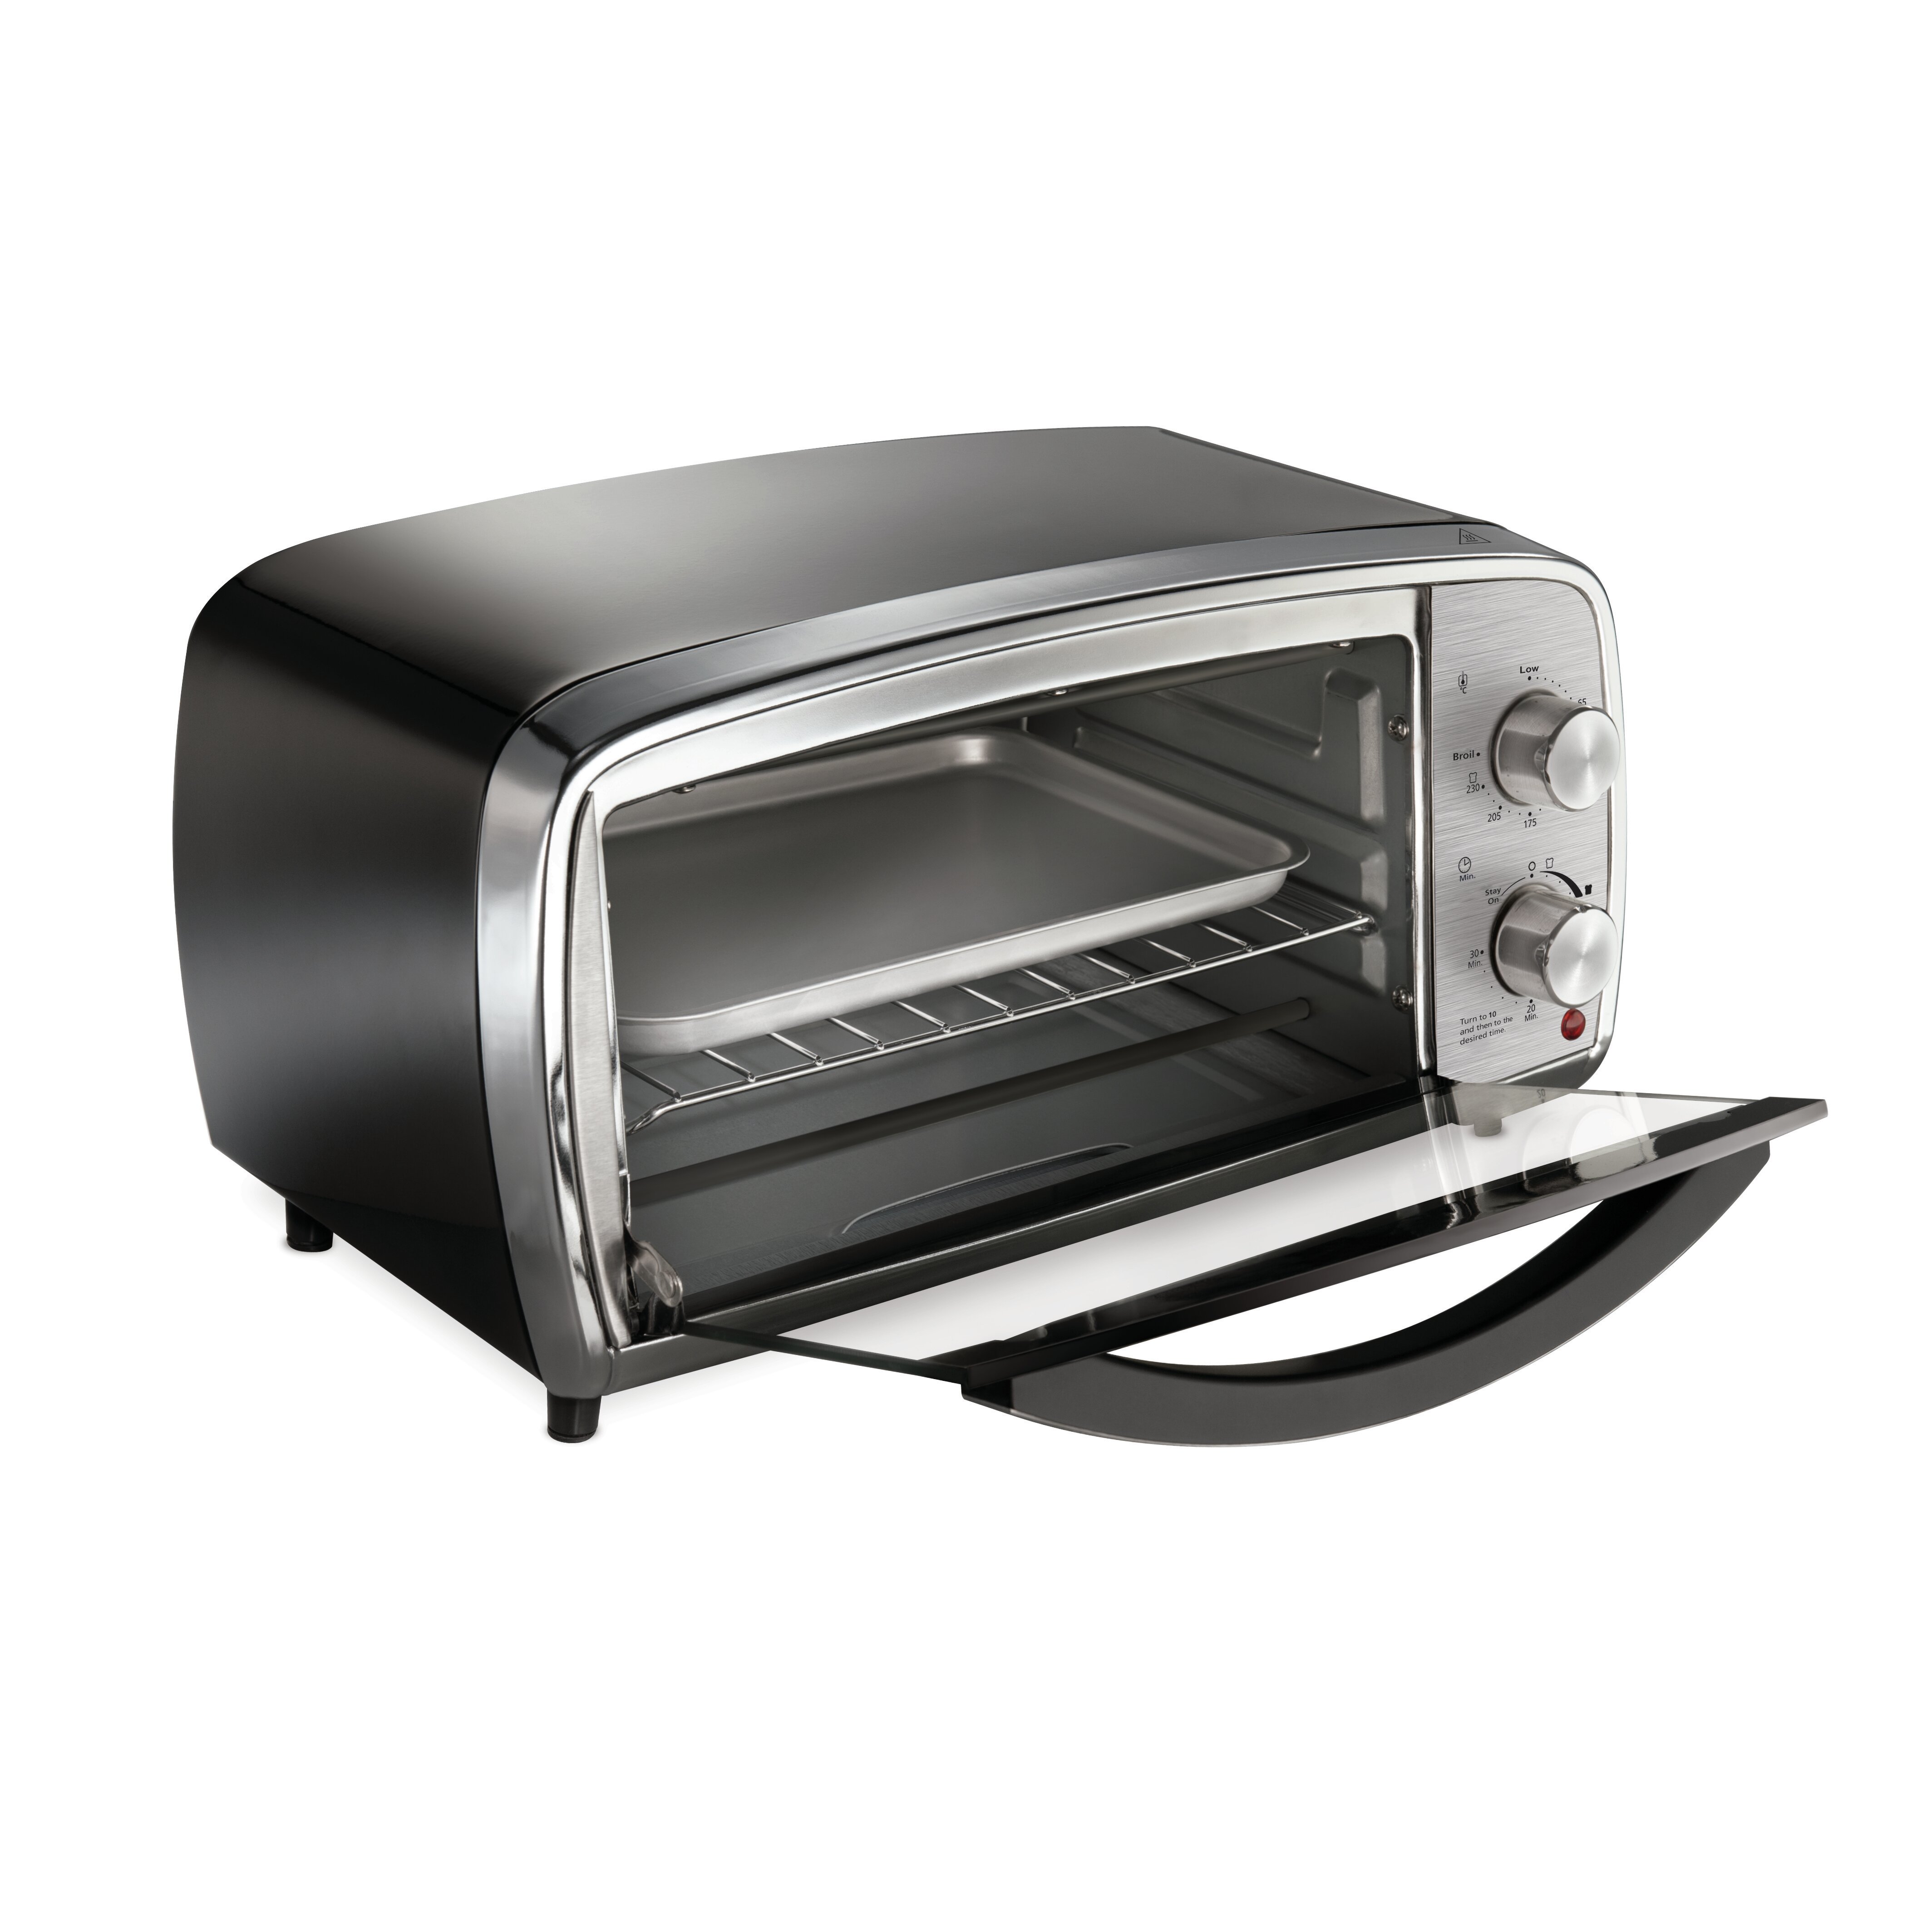 Oster 4-Slice Toaster Oven & Reviews | Wayfair